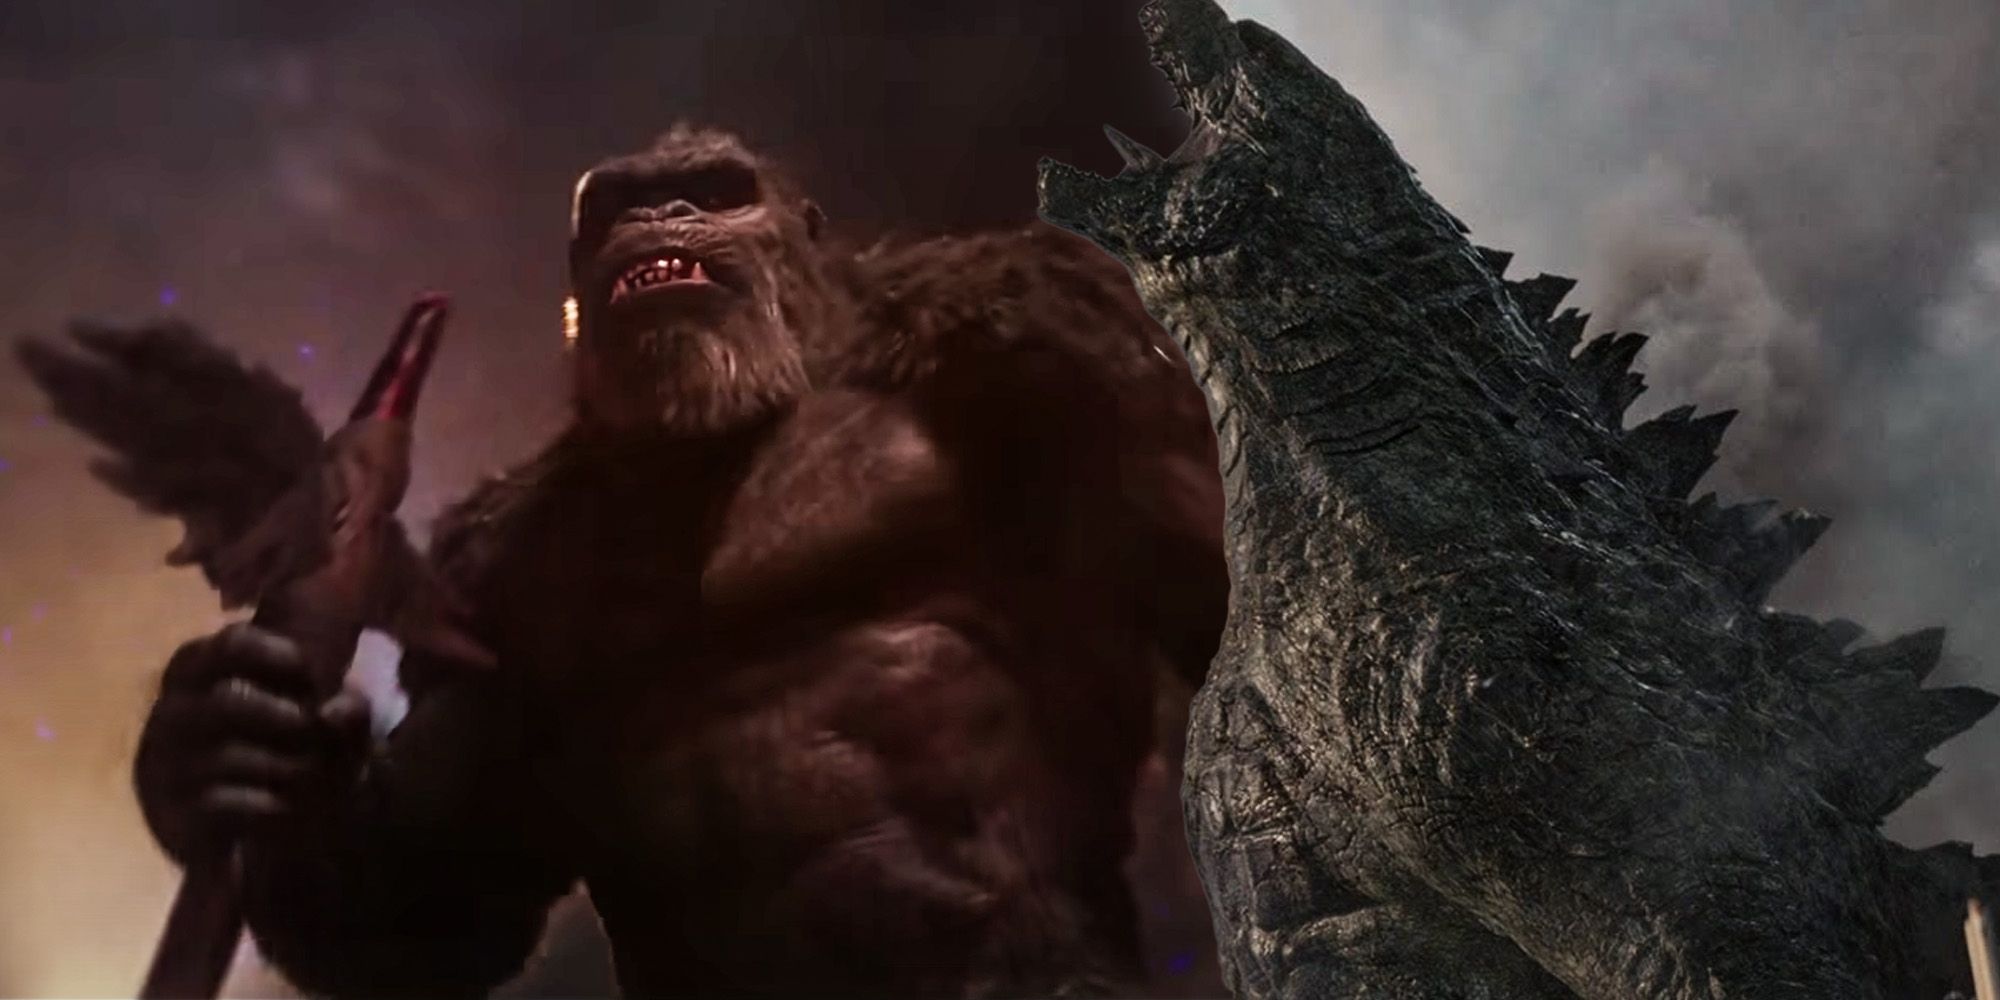 Why Kongs Axe Would Have Godzillas Powers